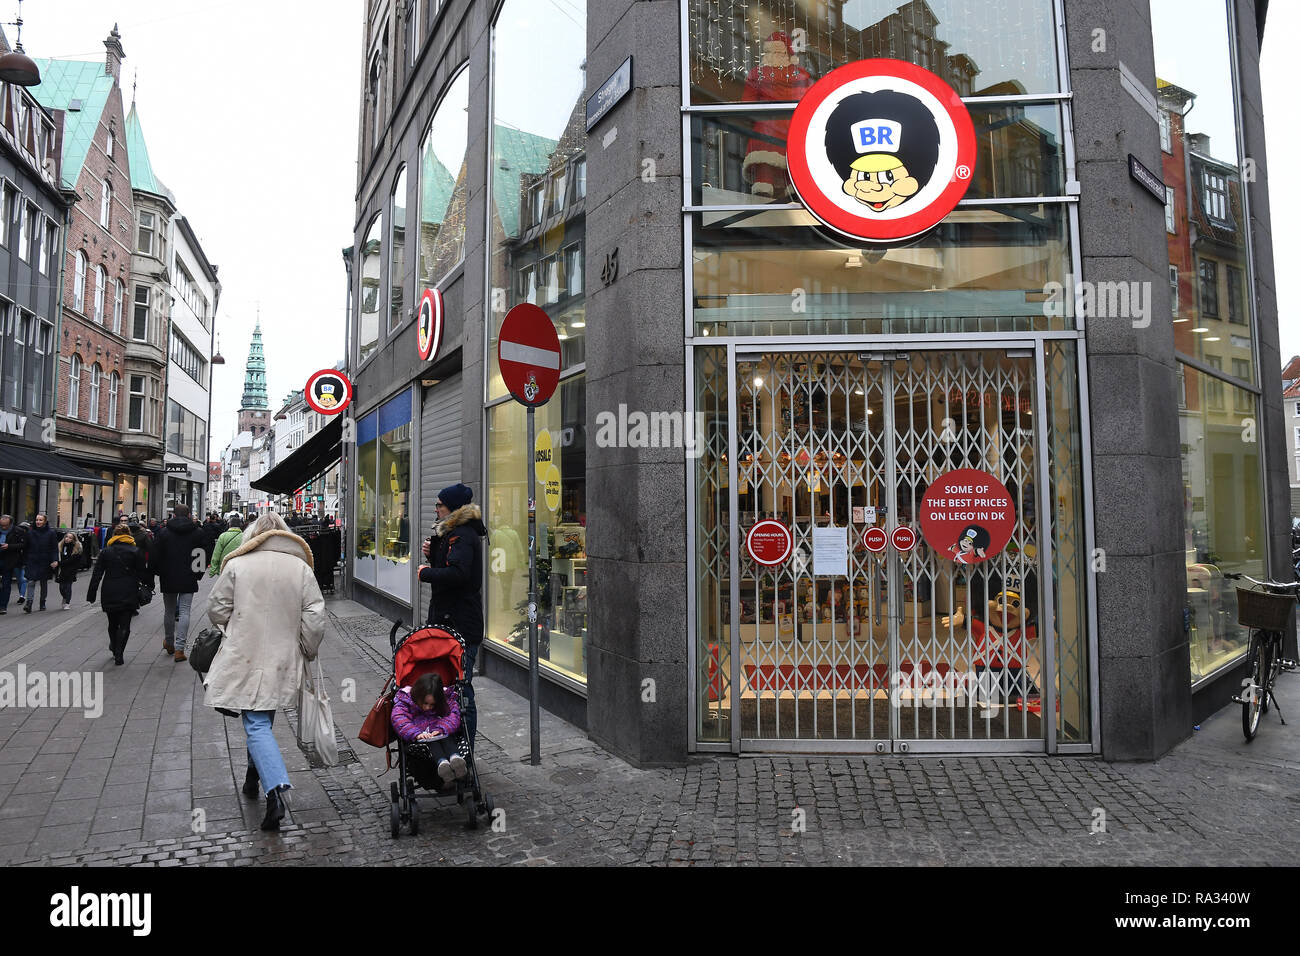 Copenhagen, Denmark. 31st Dec, 2018. Top Toy declared bankruptcy December 2018. BR toy store, which is owned by Top Toy, has closed today 31st Dec, 2018. Credit: Joseph Dean